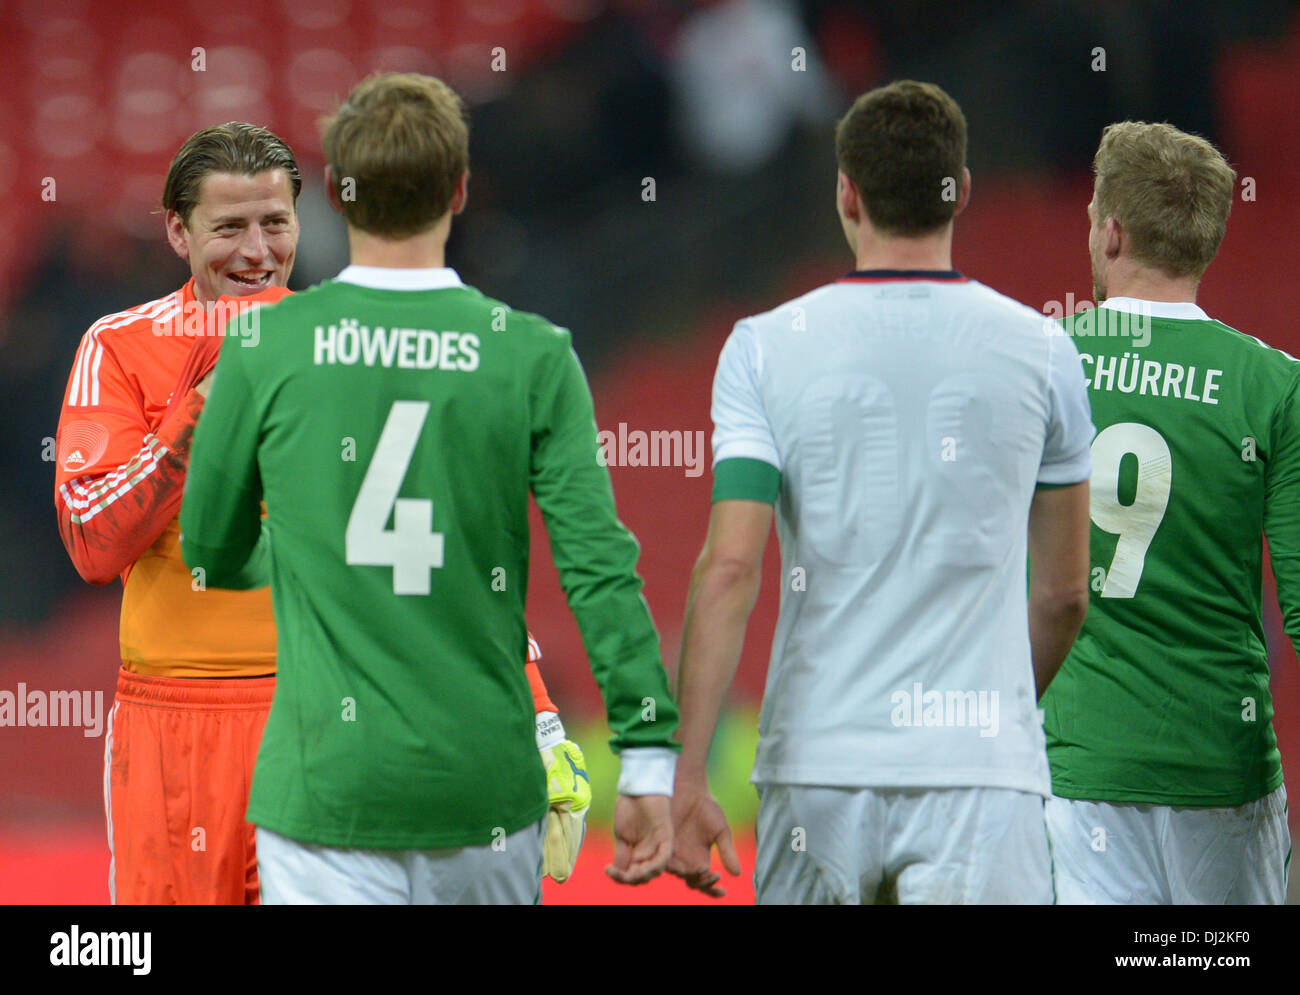 London, UK. 19th Nov, 2013. Germany's goalkeeper Roman Weidenfeller (L) reacts after the friendly soccer match between England and Germany at Wembley Stadium in London, UK, 19 November 2013. Photo: Andreas Gebert/dpa/Alamy Live News Stock Photo